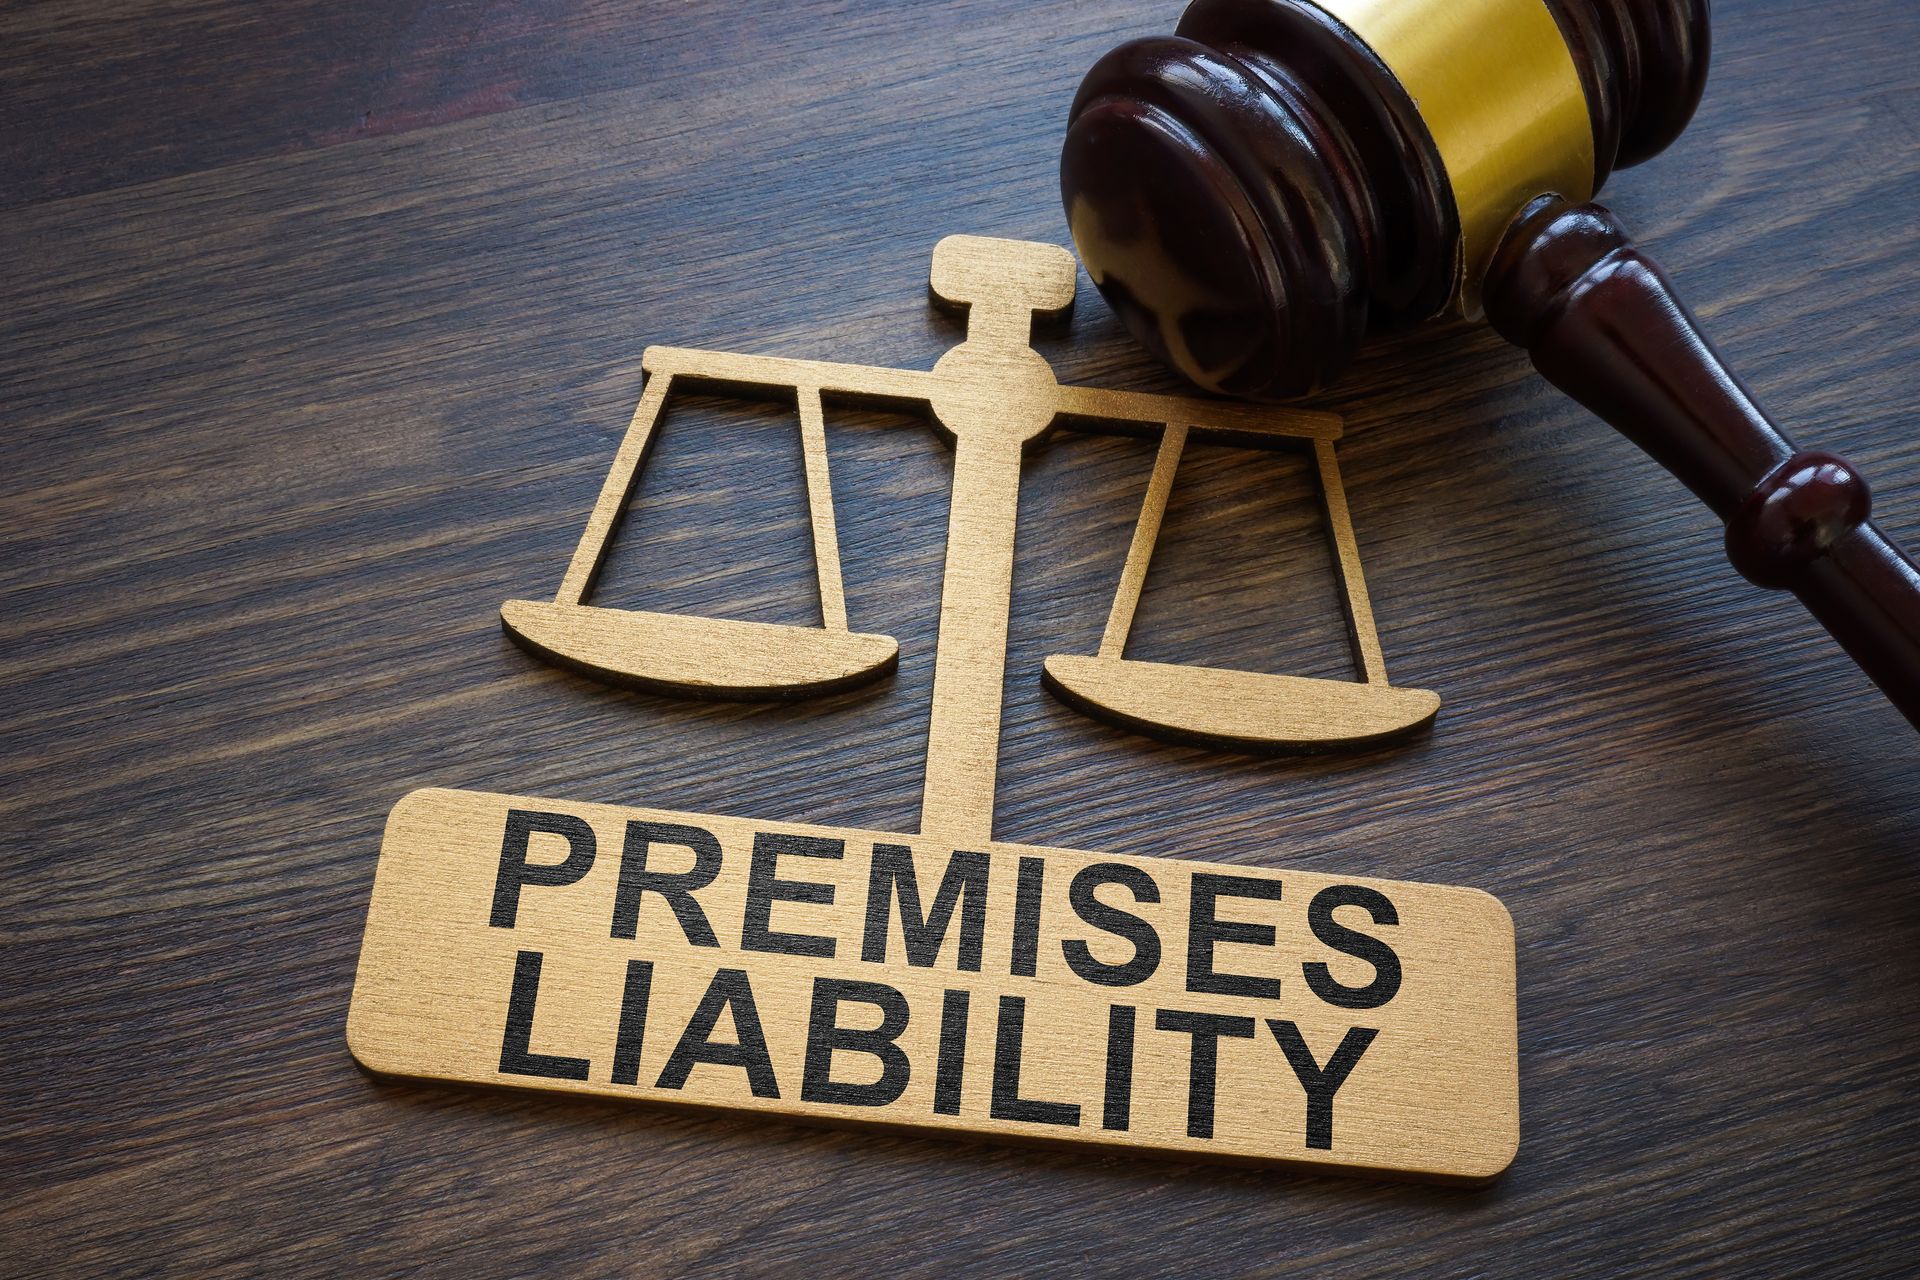 premises liability personal injury claims